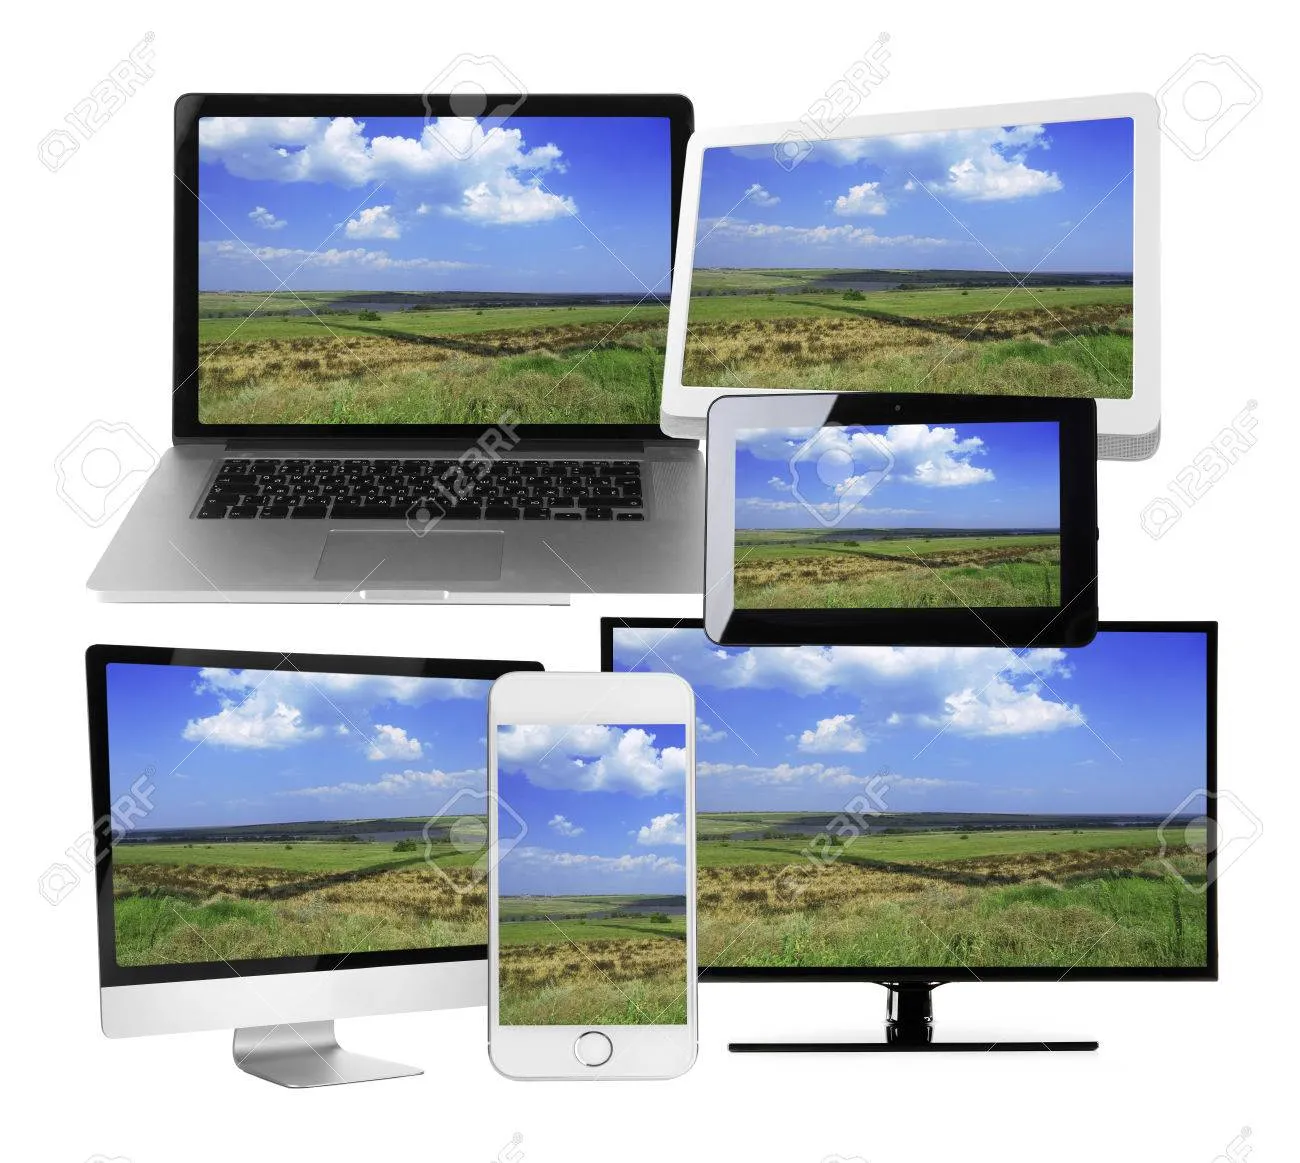 Monitors, Laptop, Tablet And Phone With Nature Wallpaper On Screens In Collage Isolated On White